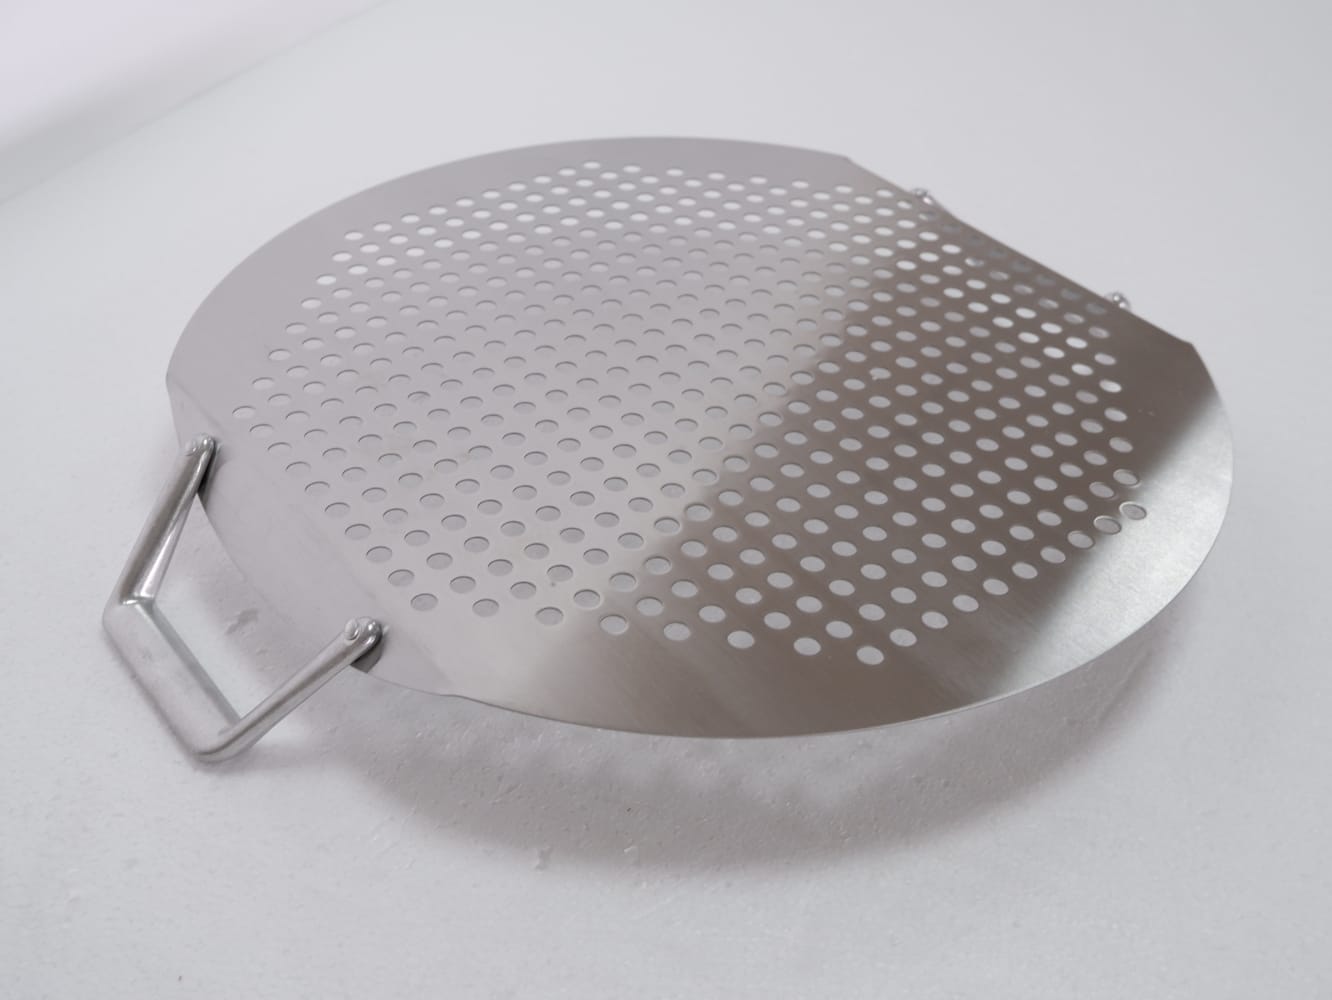 Lifespace Stainless Steel Pizza Plate / Braai Topper - Lifespace